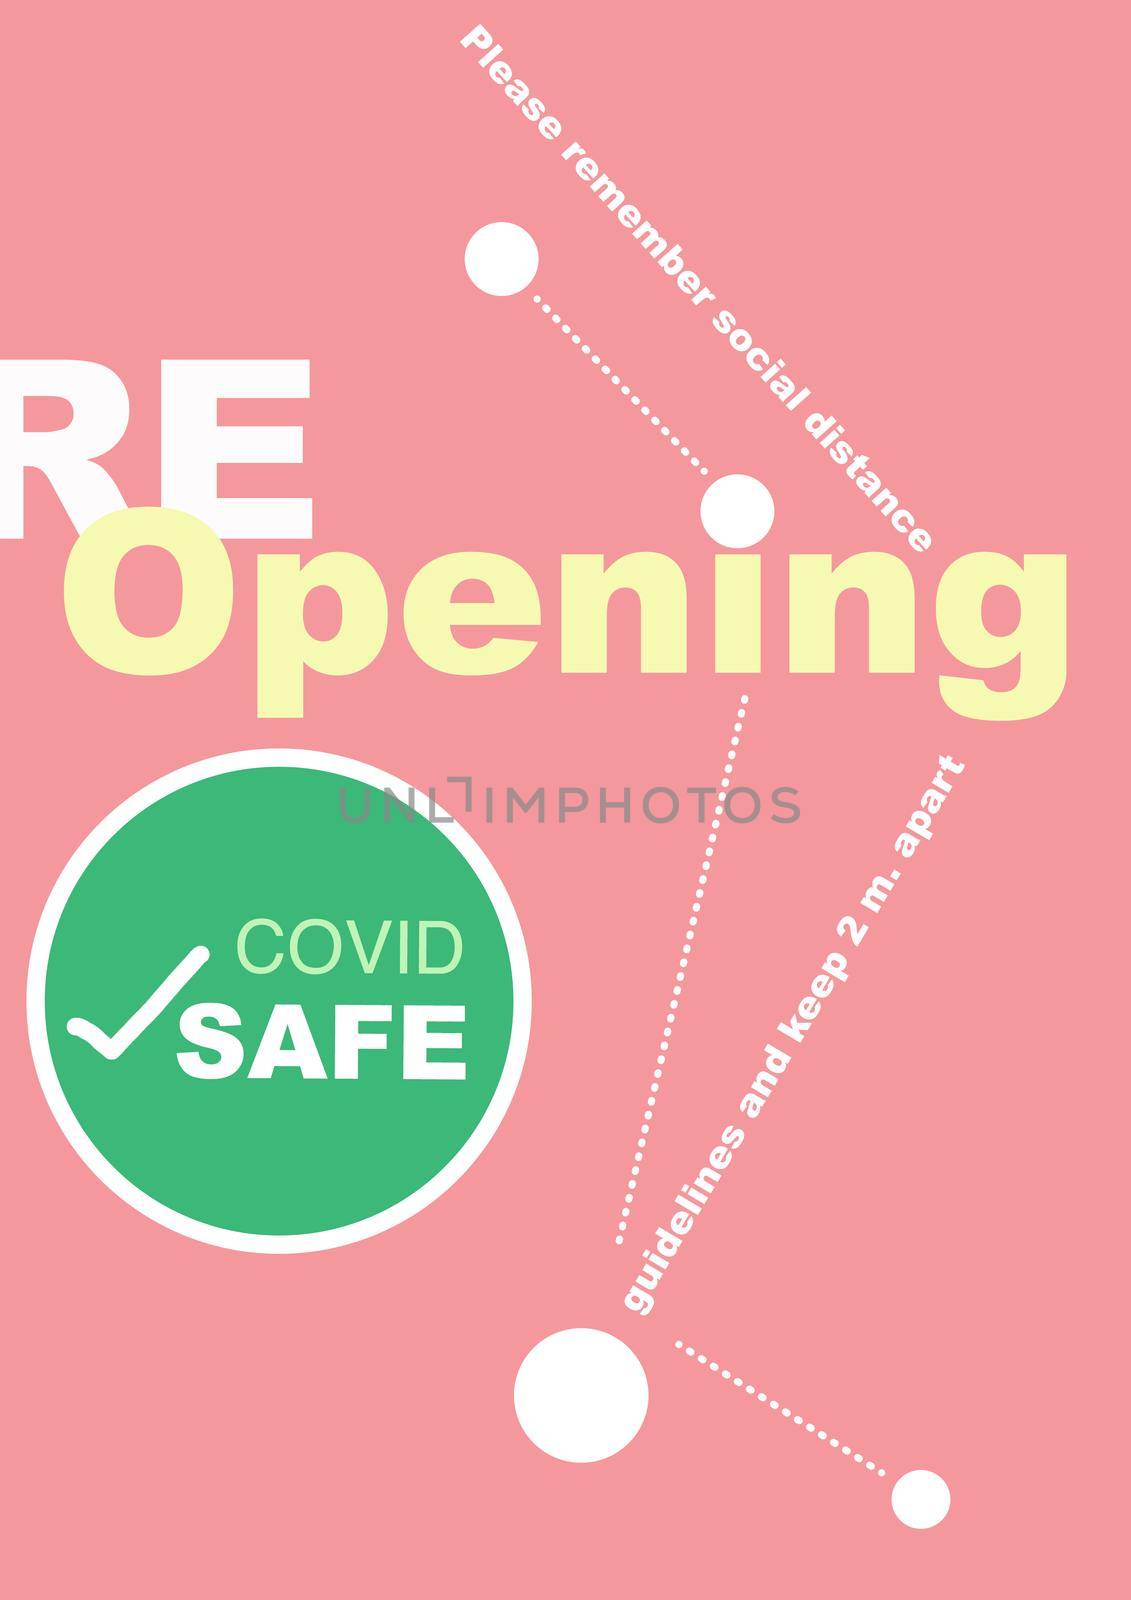 Reopening wording with Covid safe checked sign and wording keep social distance along the white dots on pink background